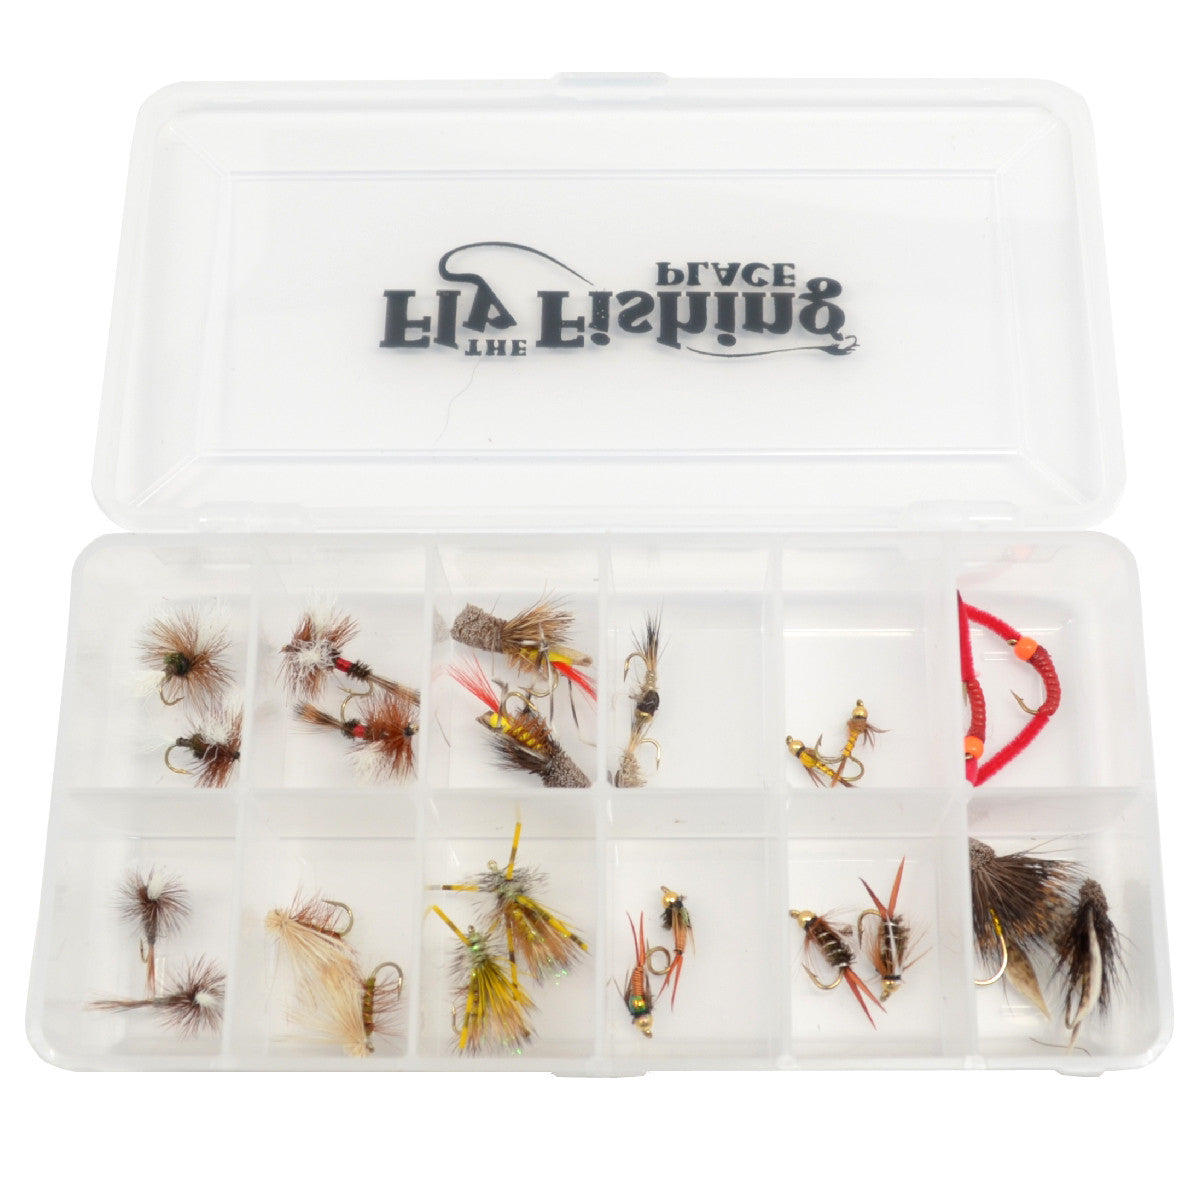 Trout Flies Assortment - 24 Flies for Trout Fly Fishing with Fly